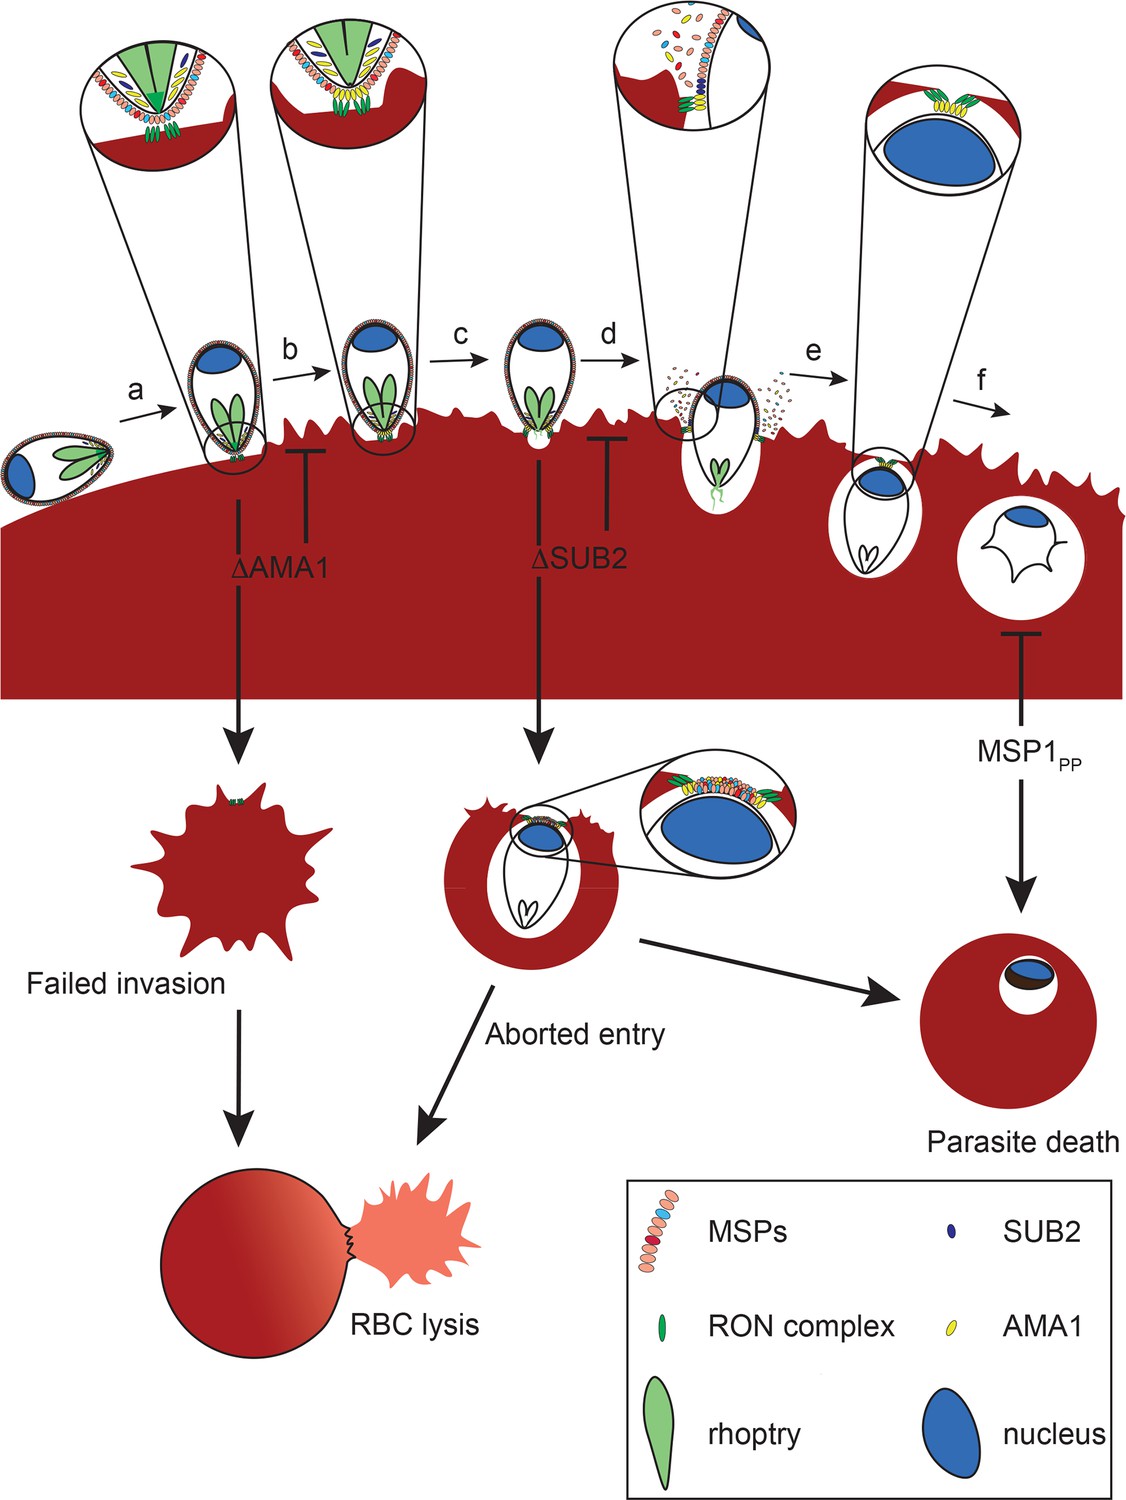 Frontiers  Erythrocyte tropism of malarial parasites: The reticulocyte  appeal